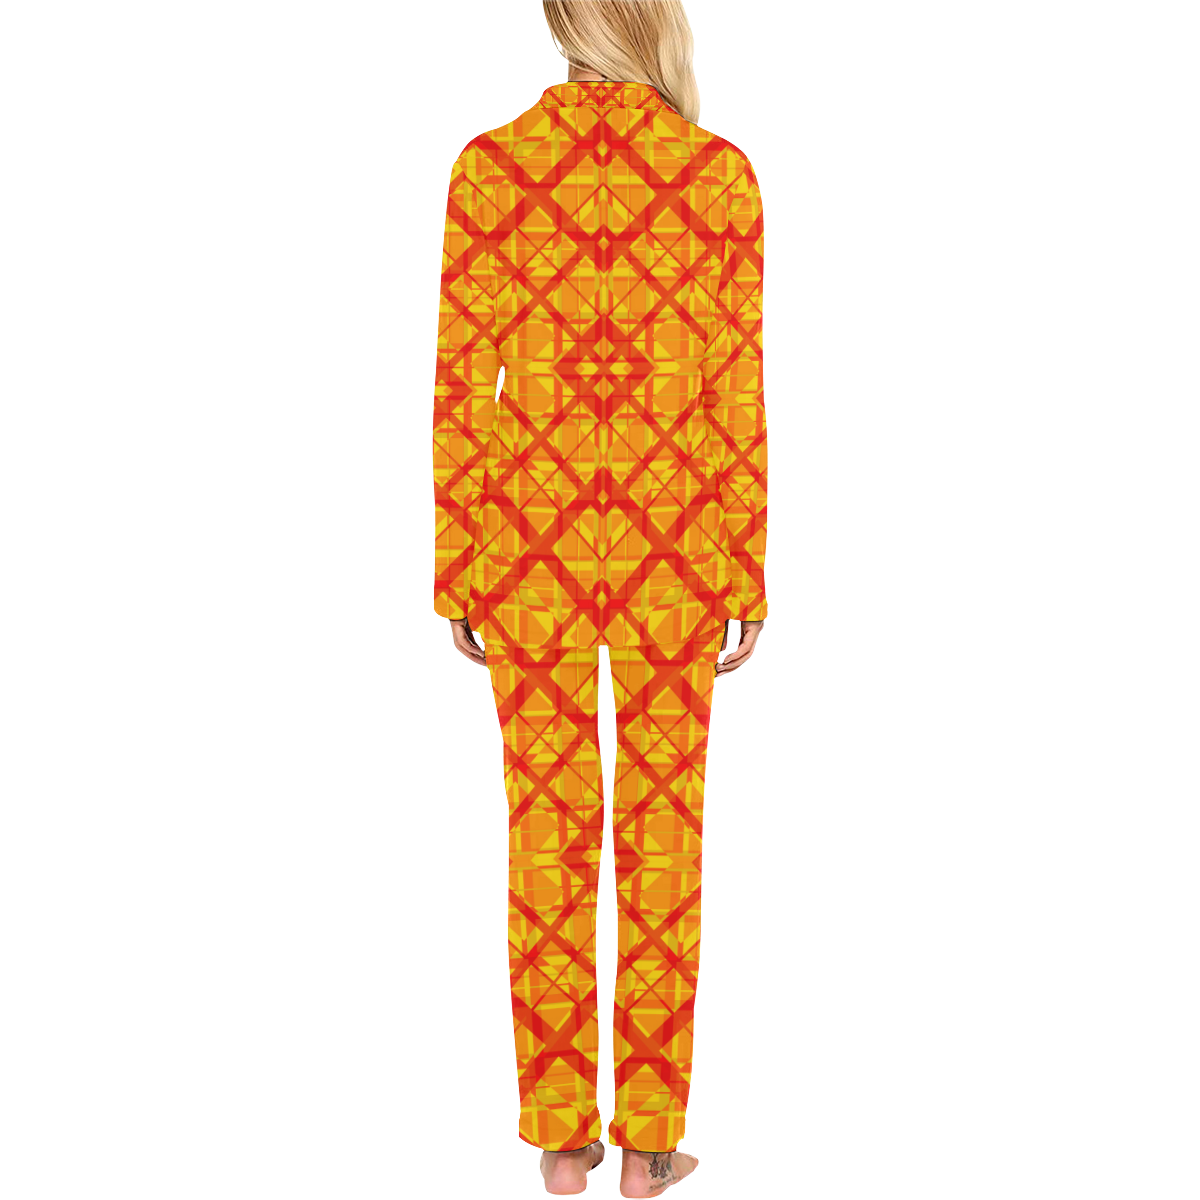 Fire Red and Yellow Plaid Pattern Women's Long Pajama Set